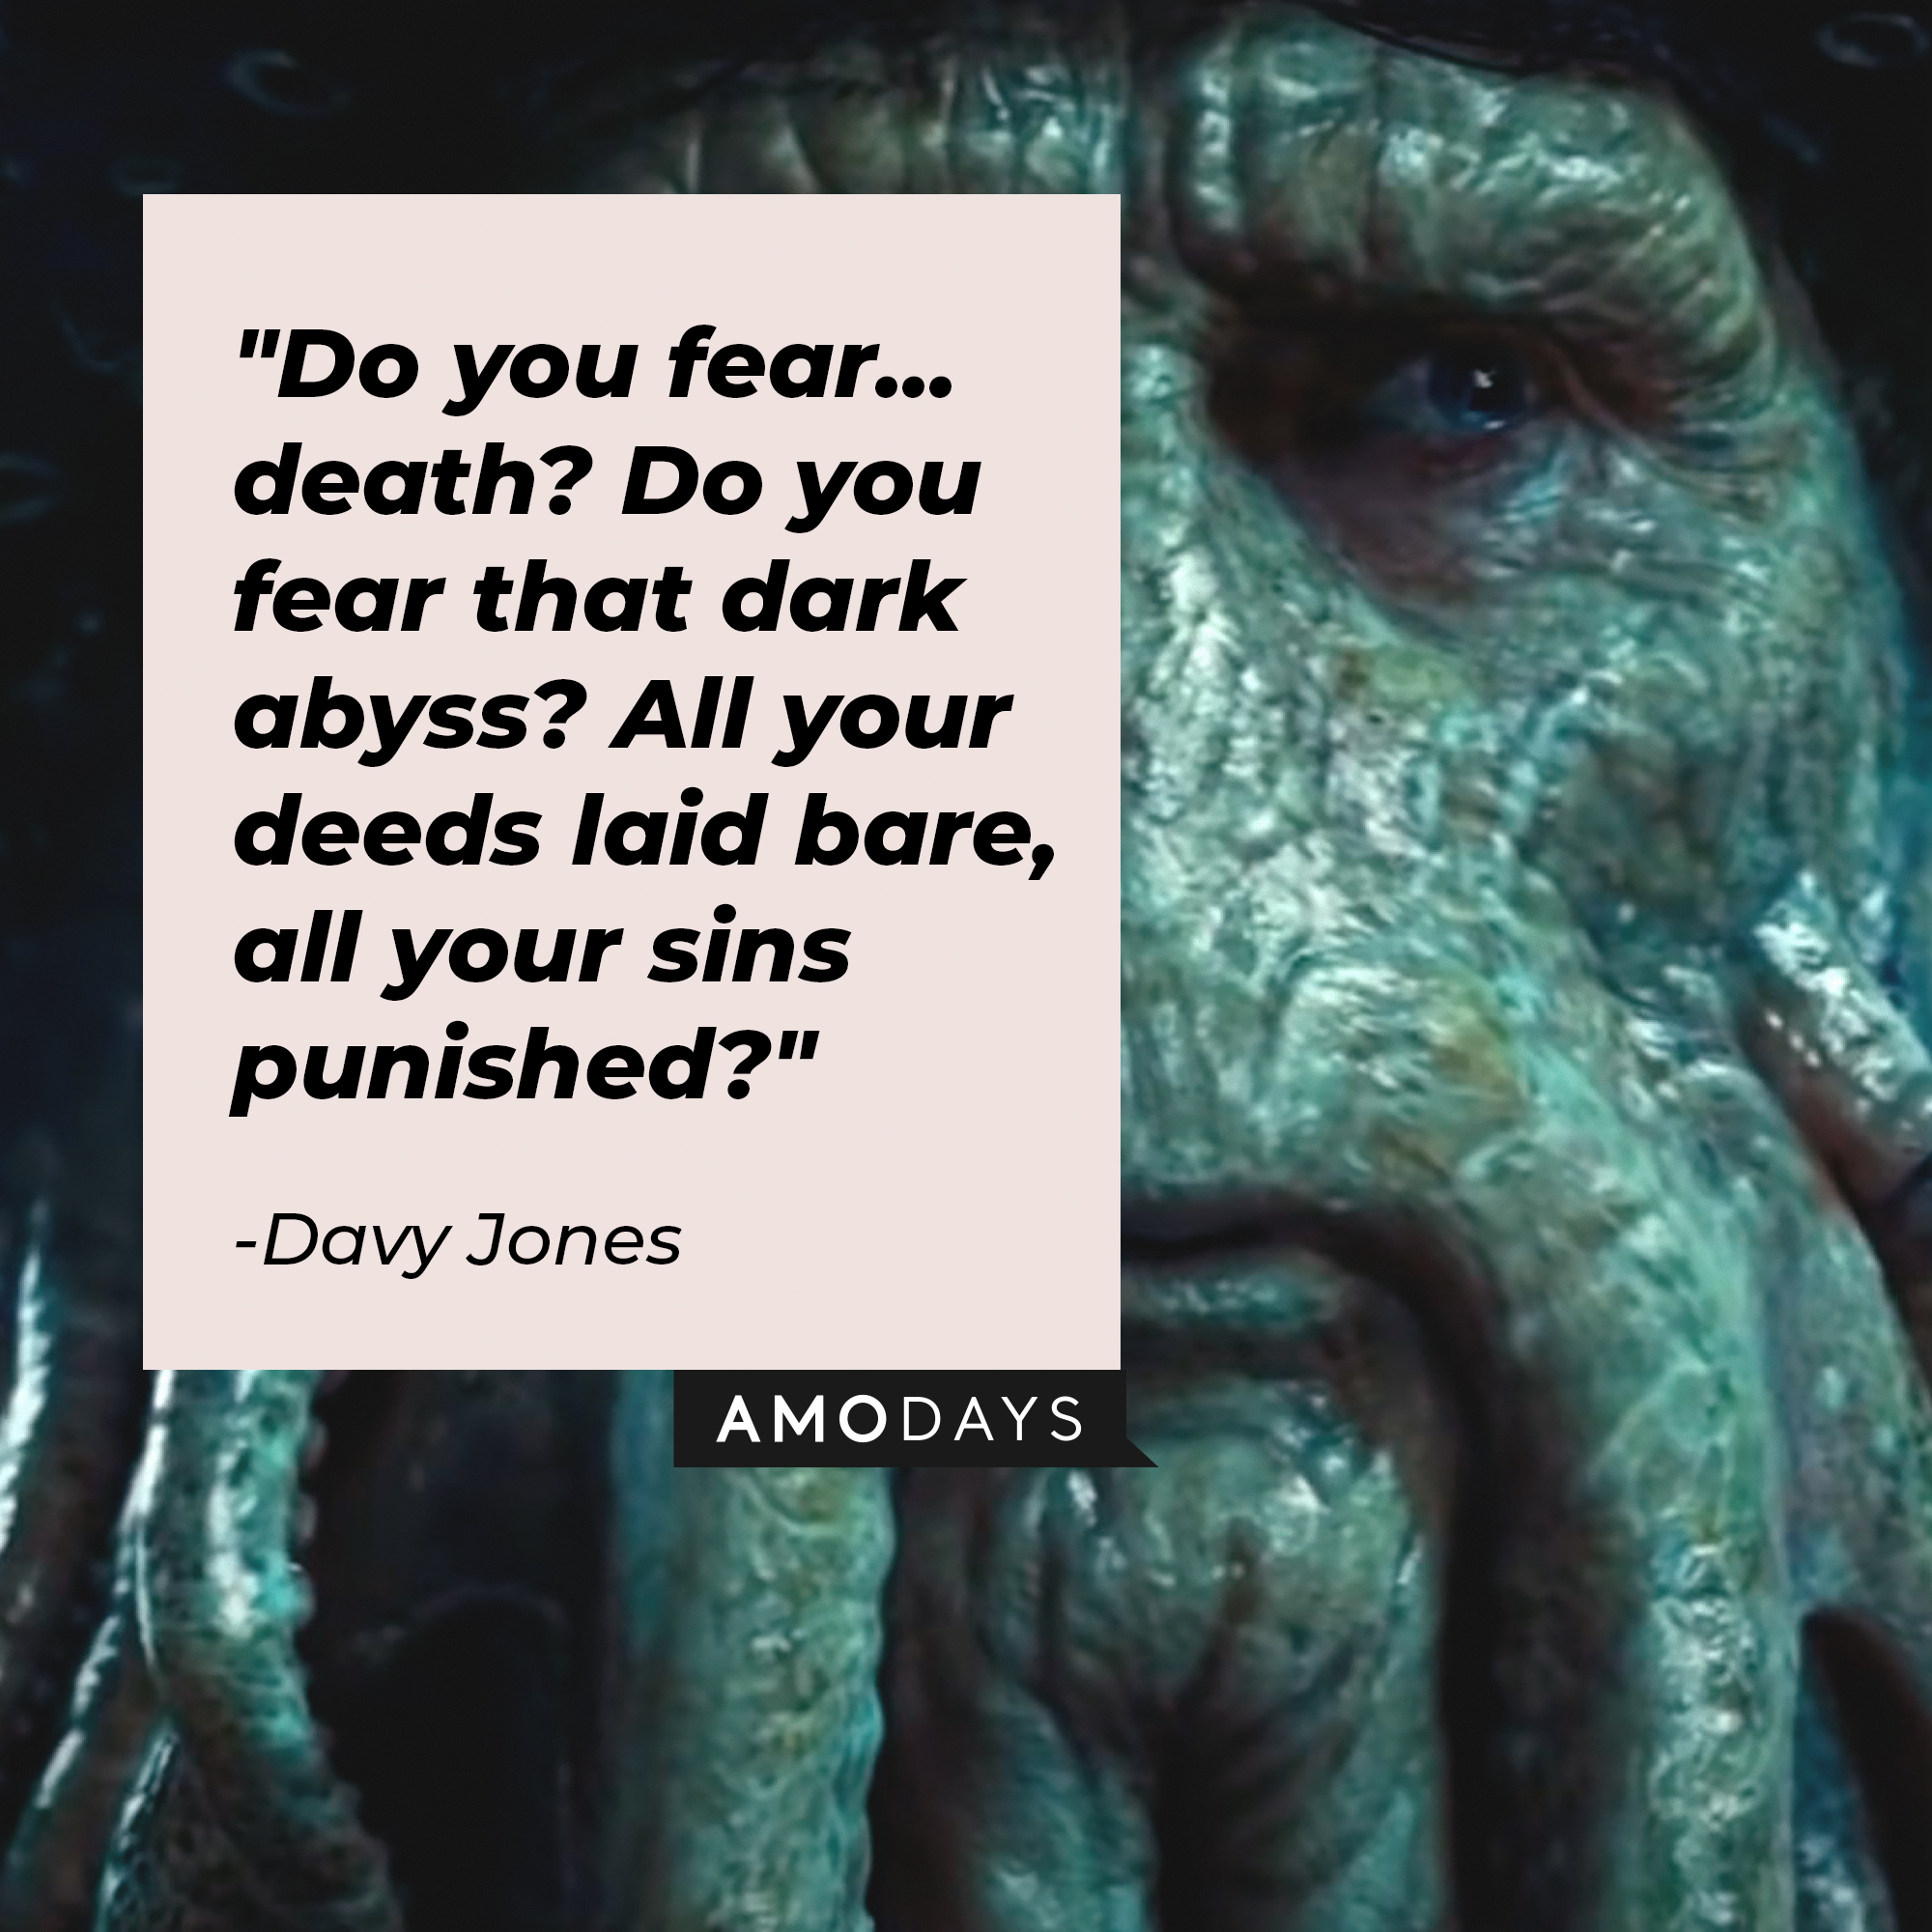 Davy Jones's quotes: "Do you fear... death? Do you fear that dark abyss? All your deeds laid bare, all your sins punished?" | Image: AmoDays